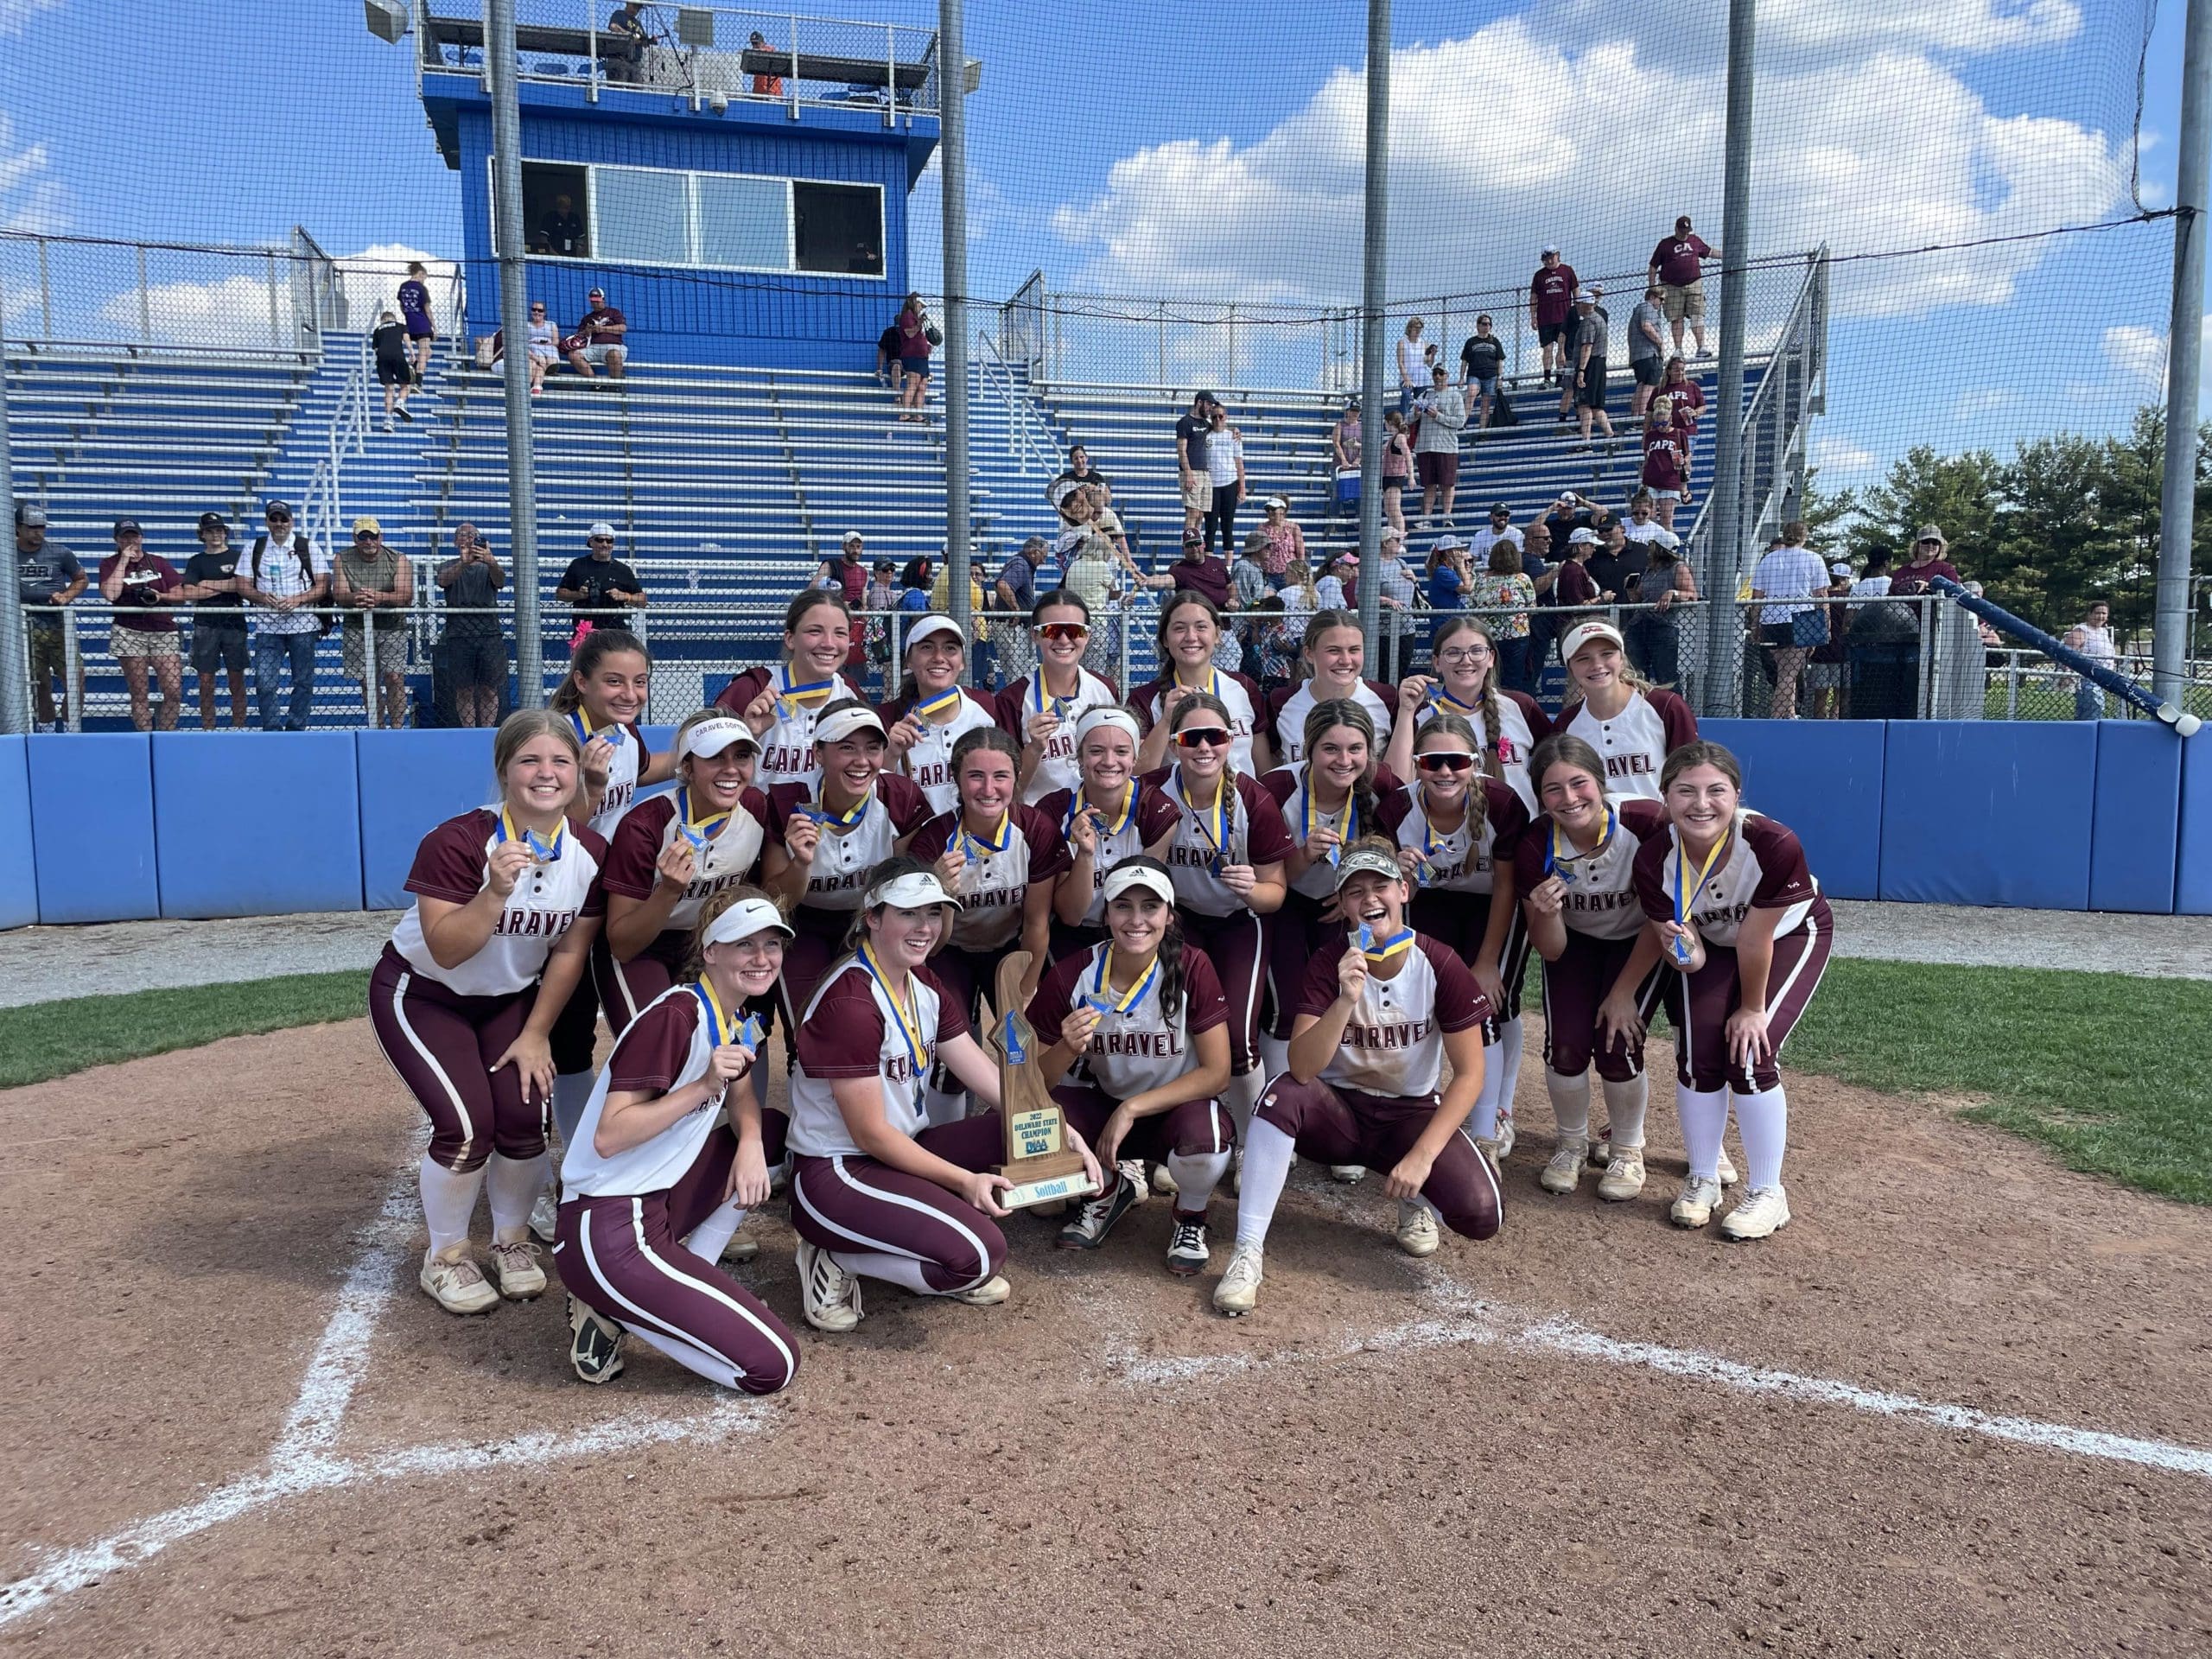 Featured image for “Caravel wins thrilling softball championship over Sussex Central”